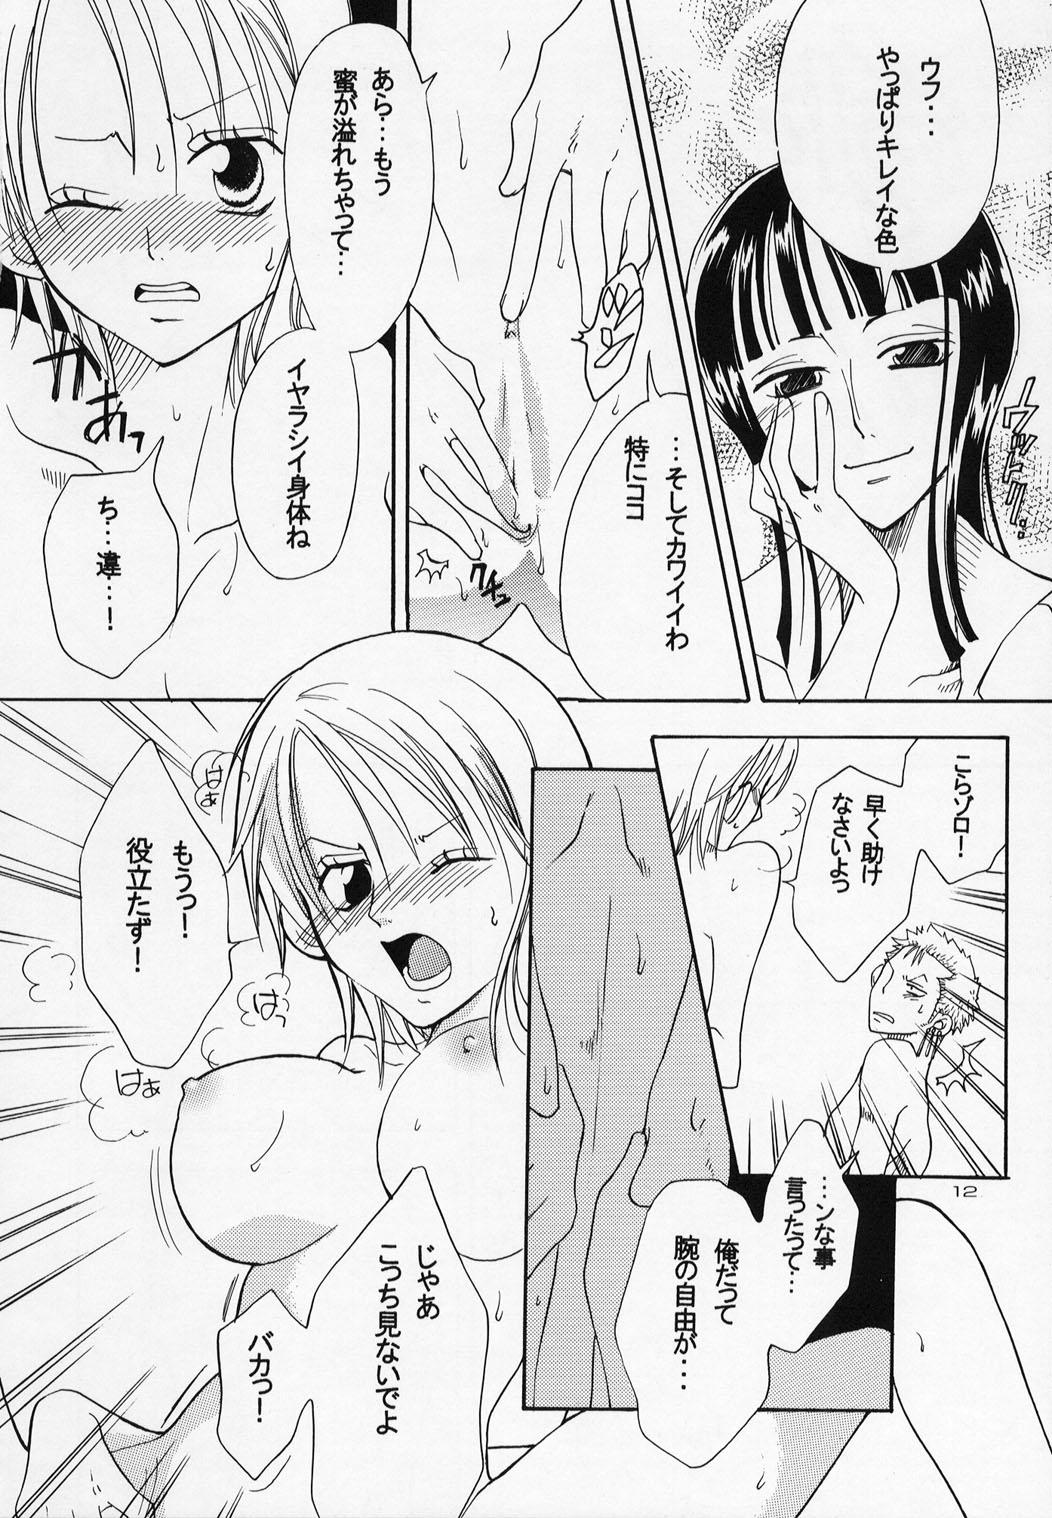 Clit Shiawase Punch! 4 - One piece Spreading - Page 12